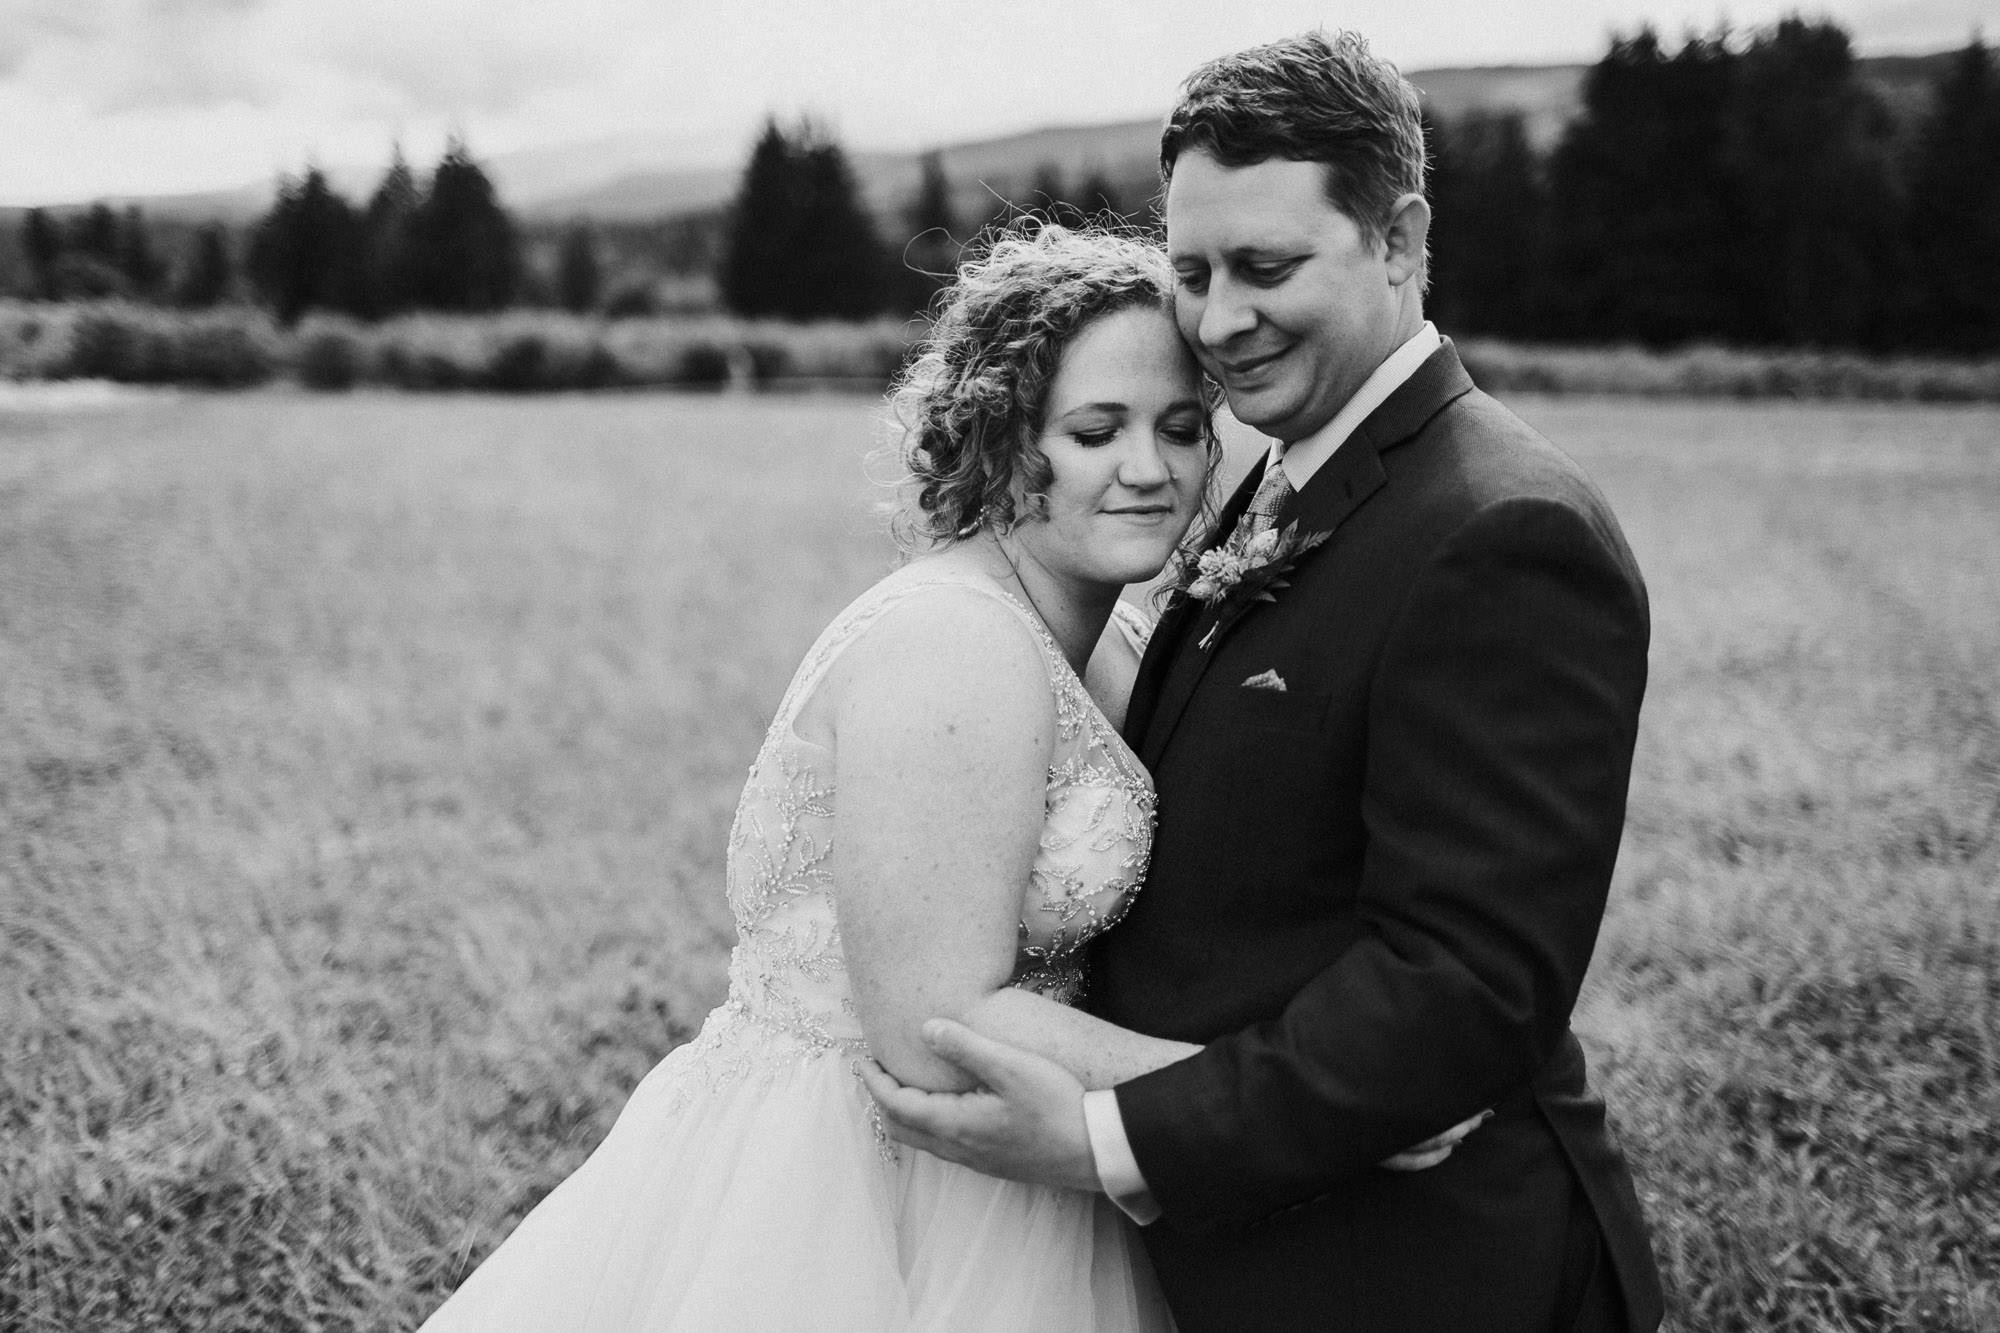 The bride and groom embrace at Mt. View Orchards in Mt Hood, Oregon.